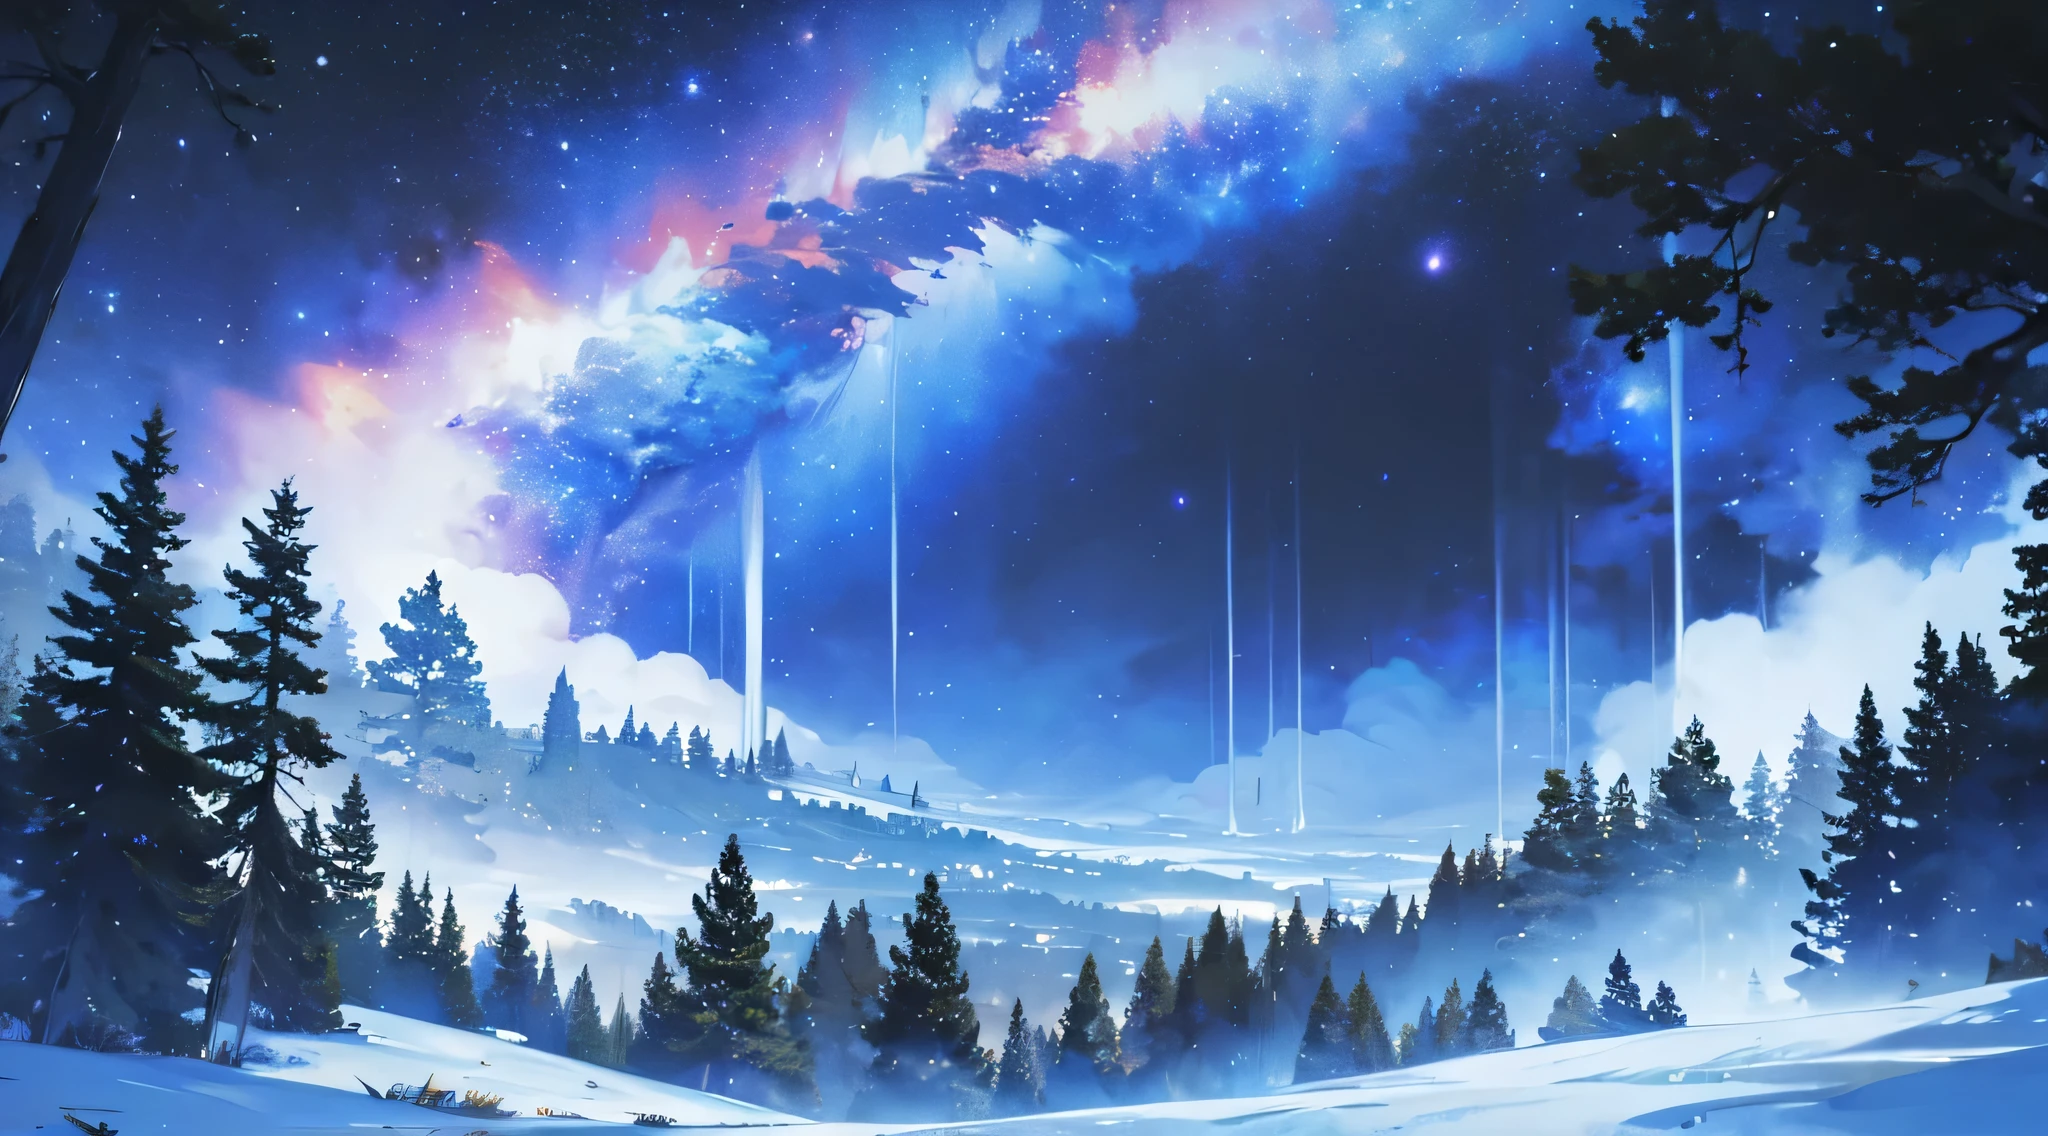 night forest, cozy illustration, Milky Way, winter, breath taking beautiful, silence and night, landscape, scale frame, view from afar, complex composition